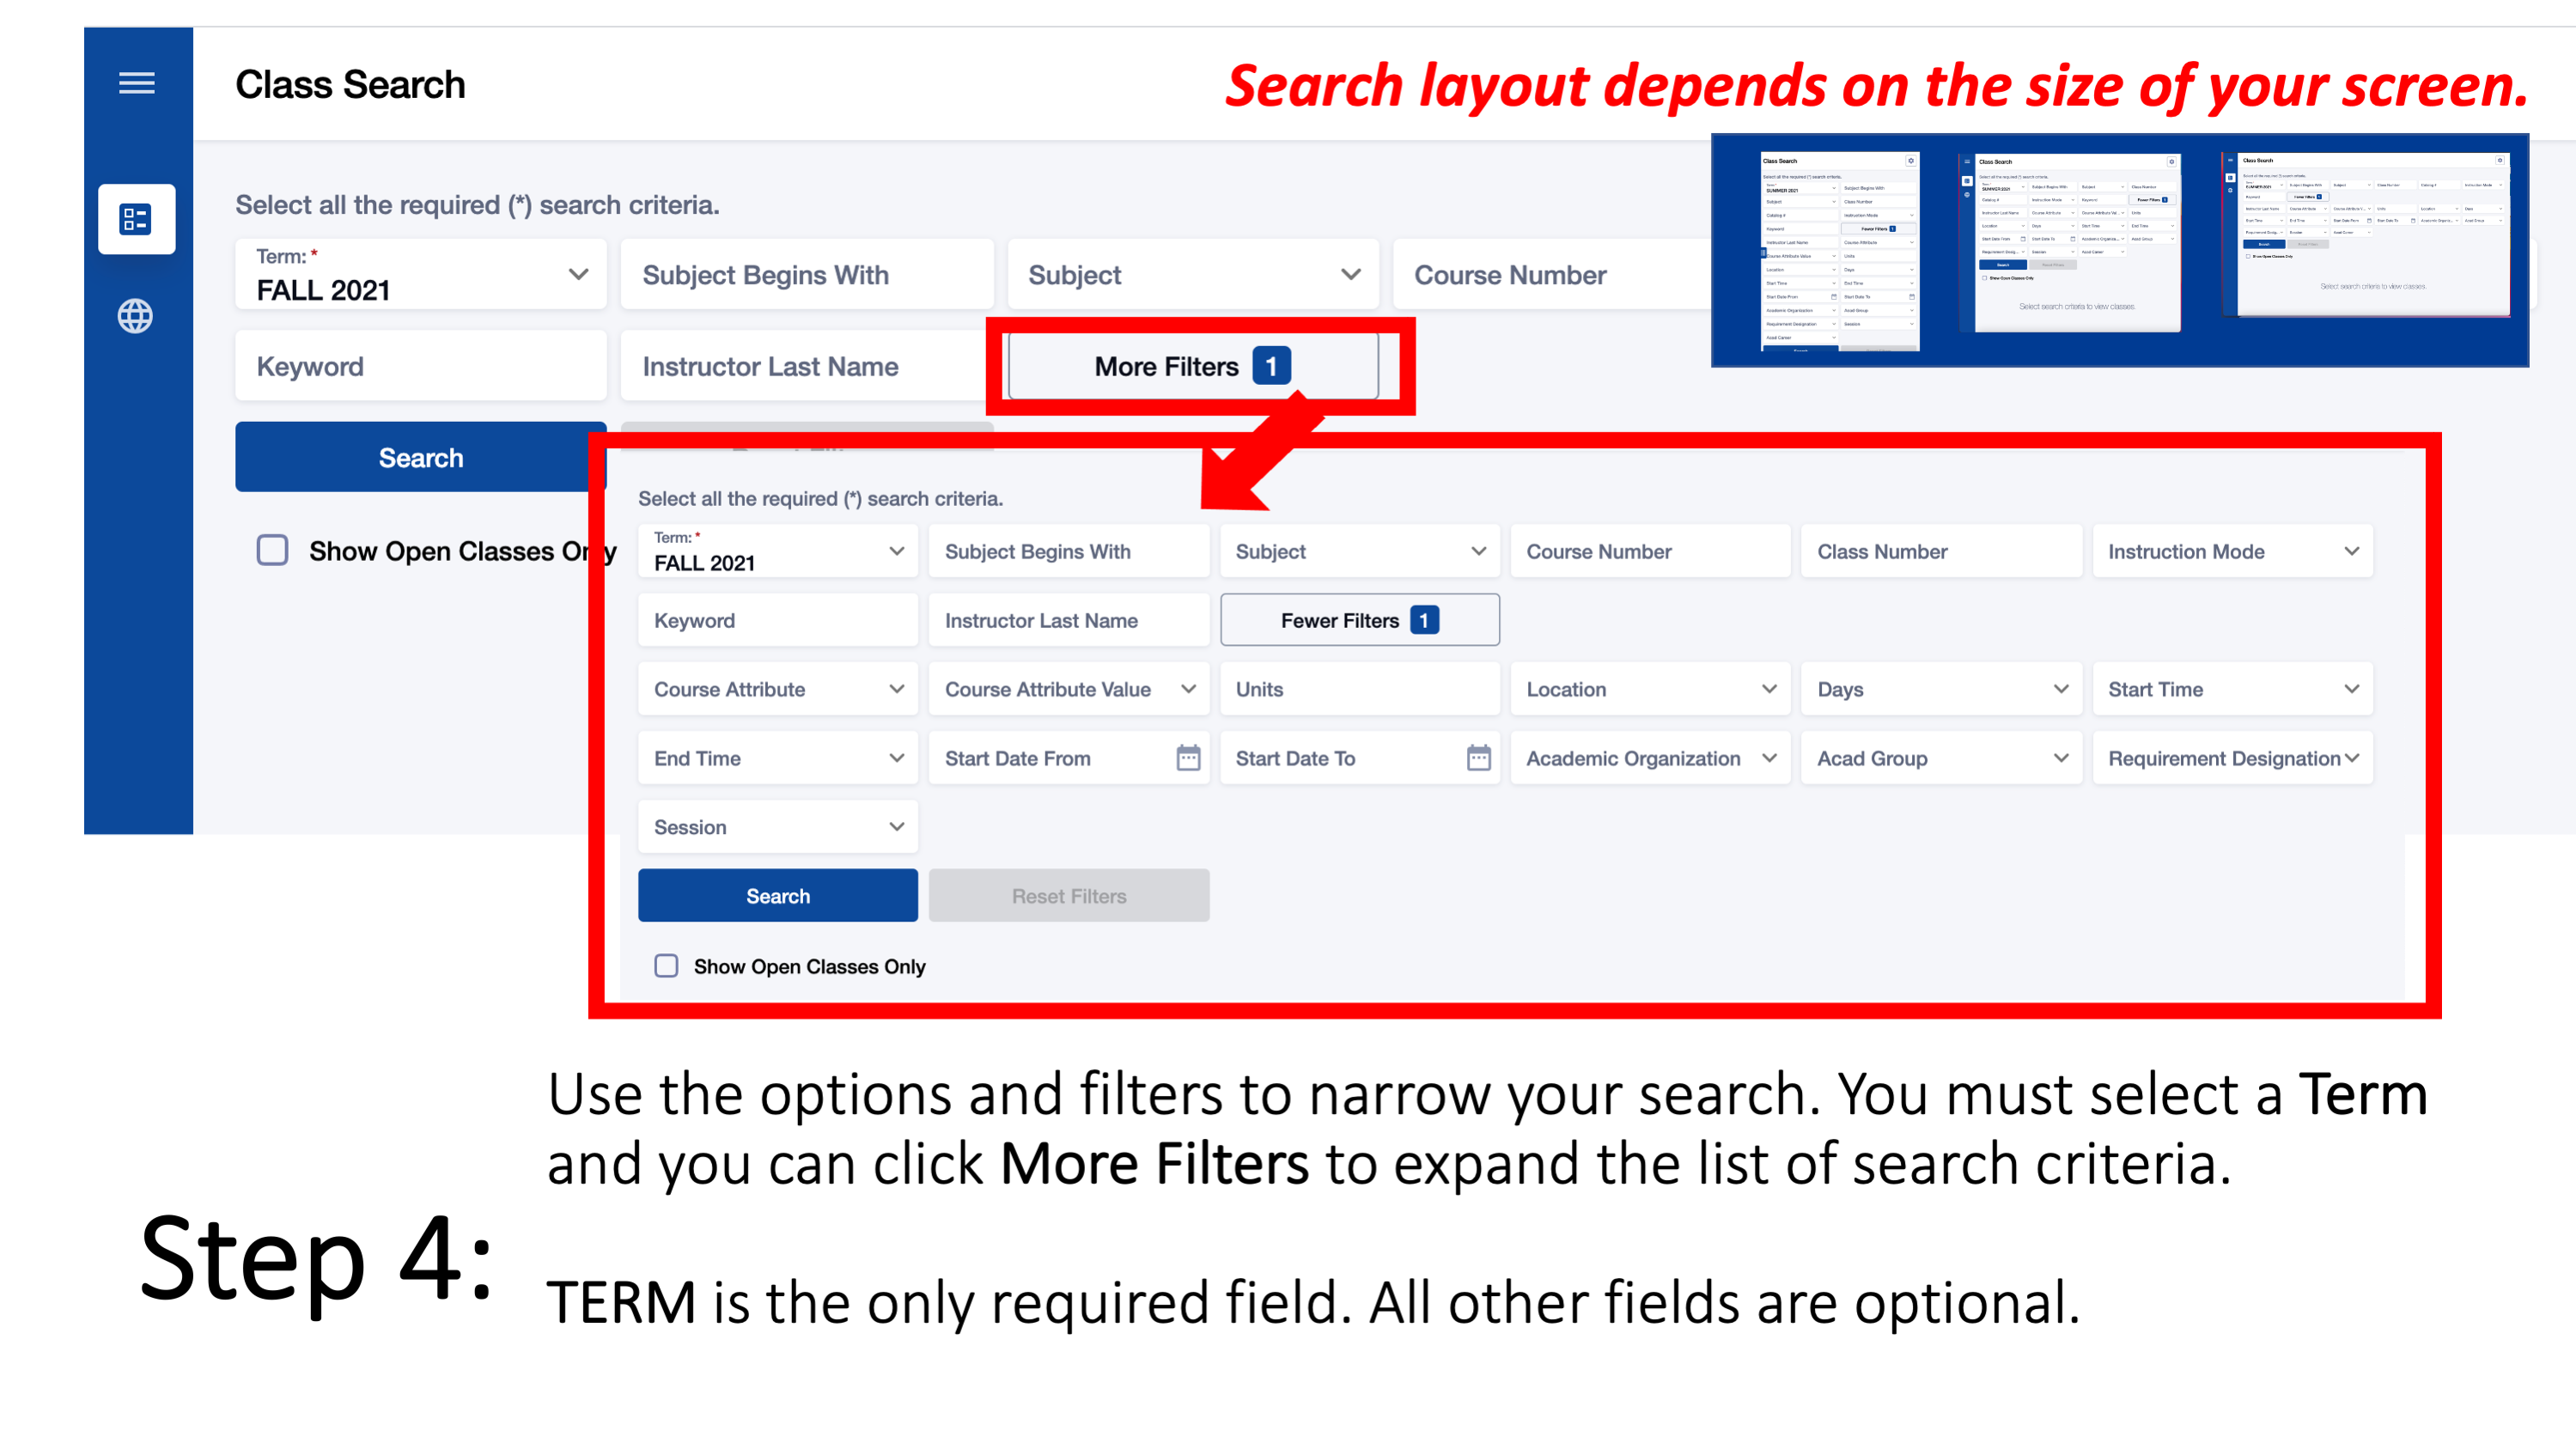 Step 4: Use the options and filters to narrow your search. You must select a Term and you can click More Filters to expand the list of search criteria. TERM is the only required field. All other fields are optional. Search layout depends on the size of your screen.